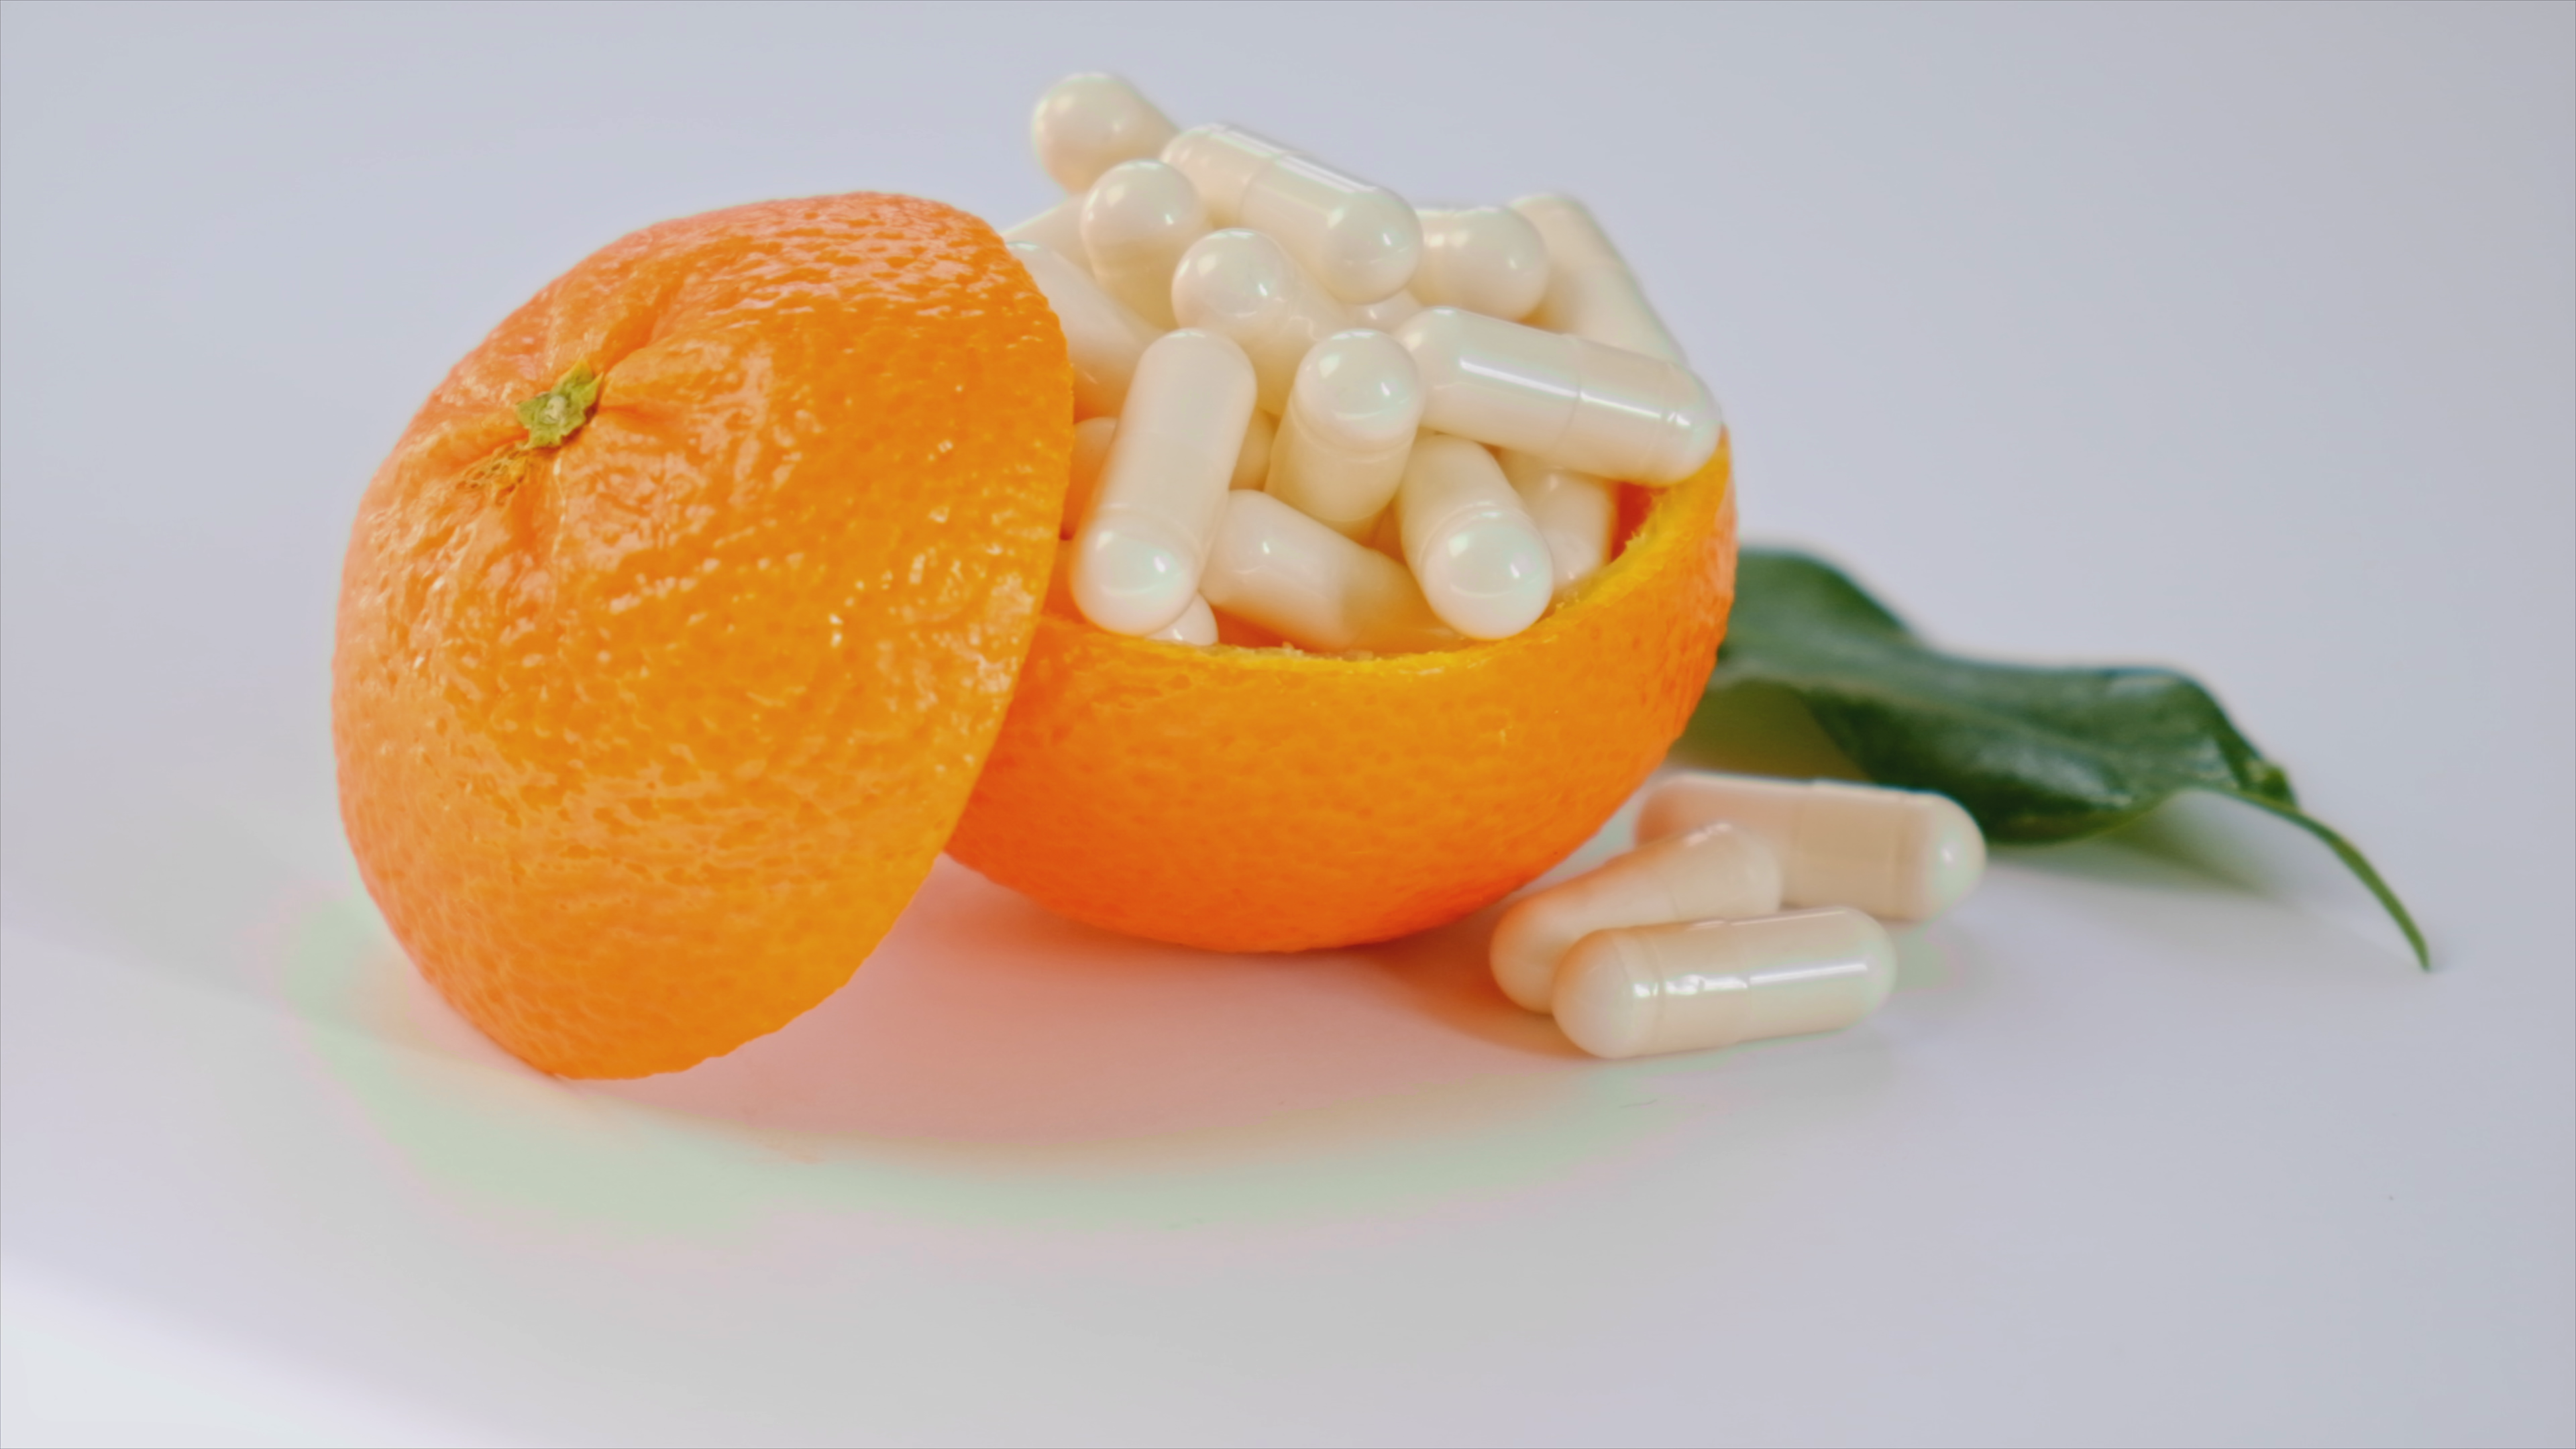 U.S. study uncovers vitamin C loss and deficiency in some women with HIV